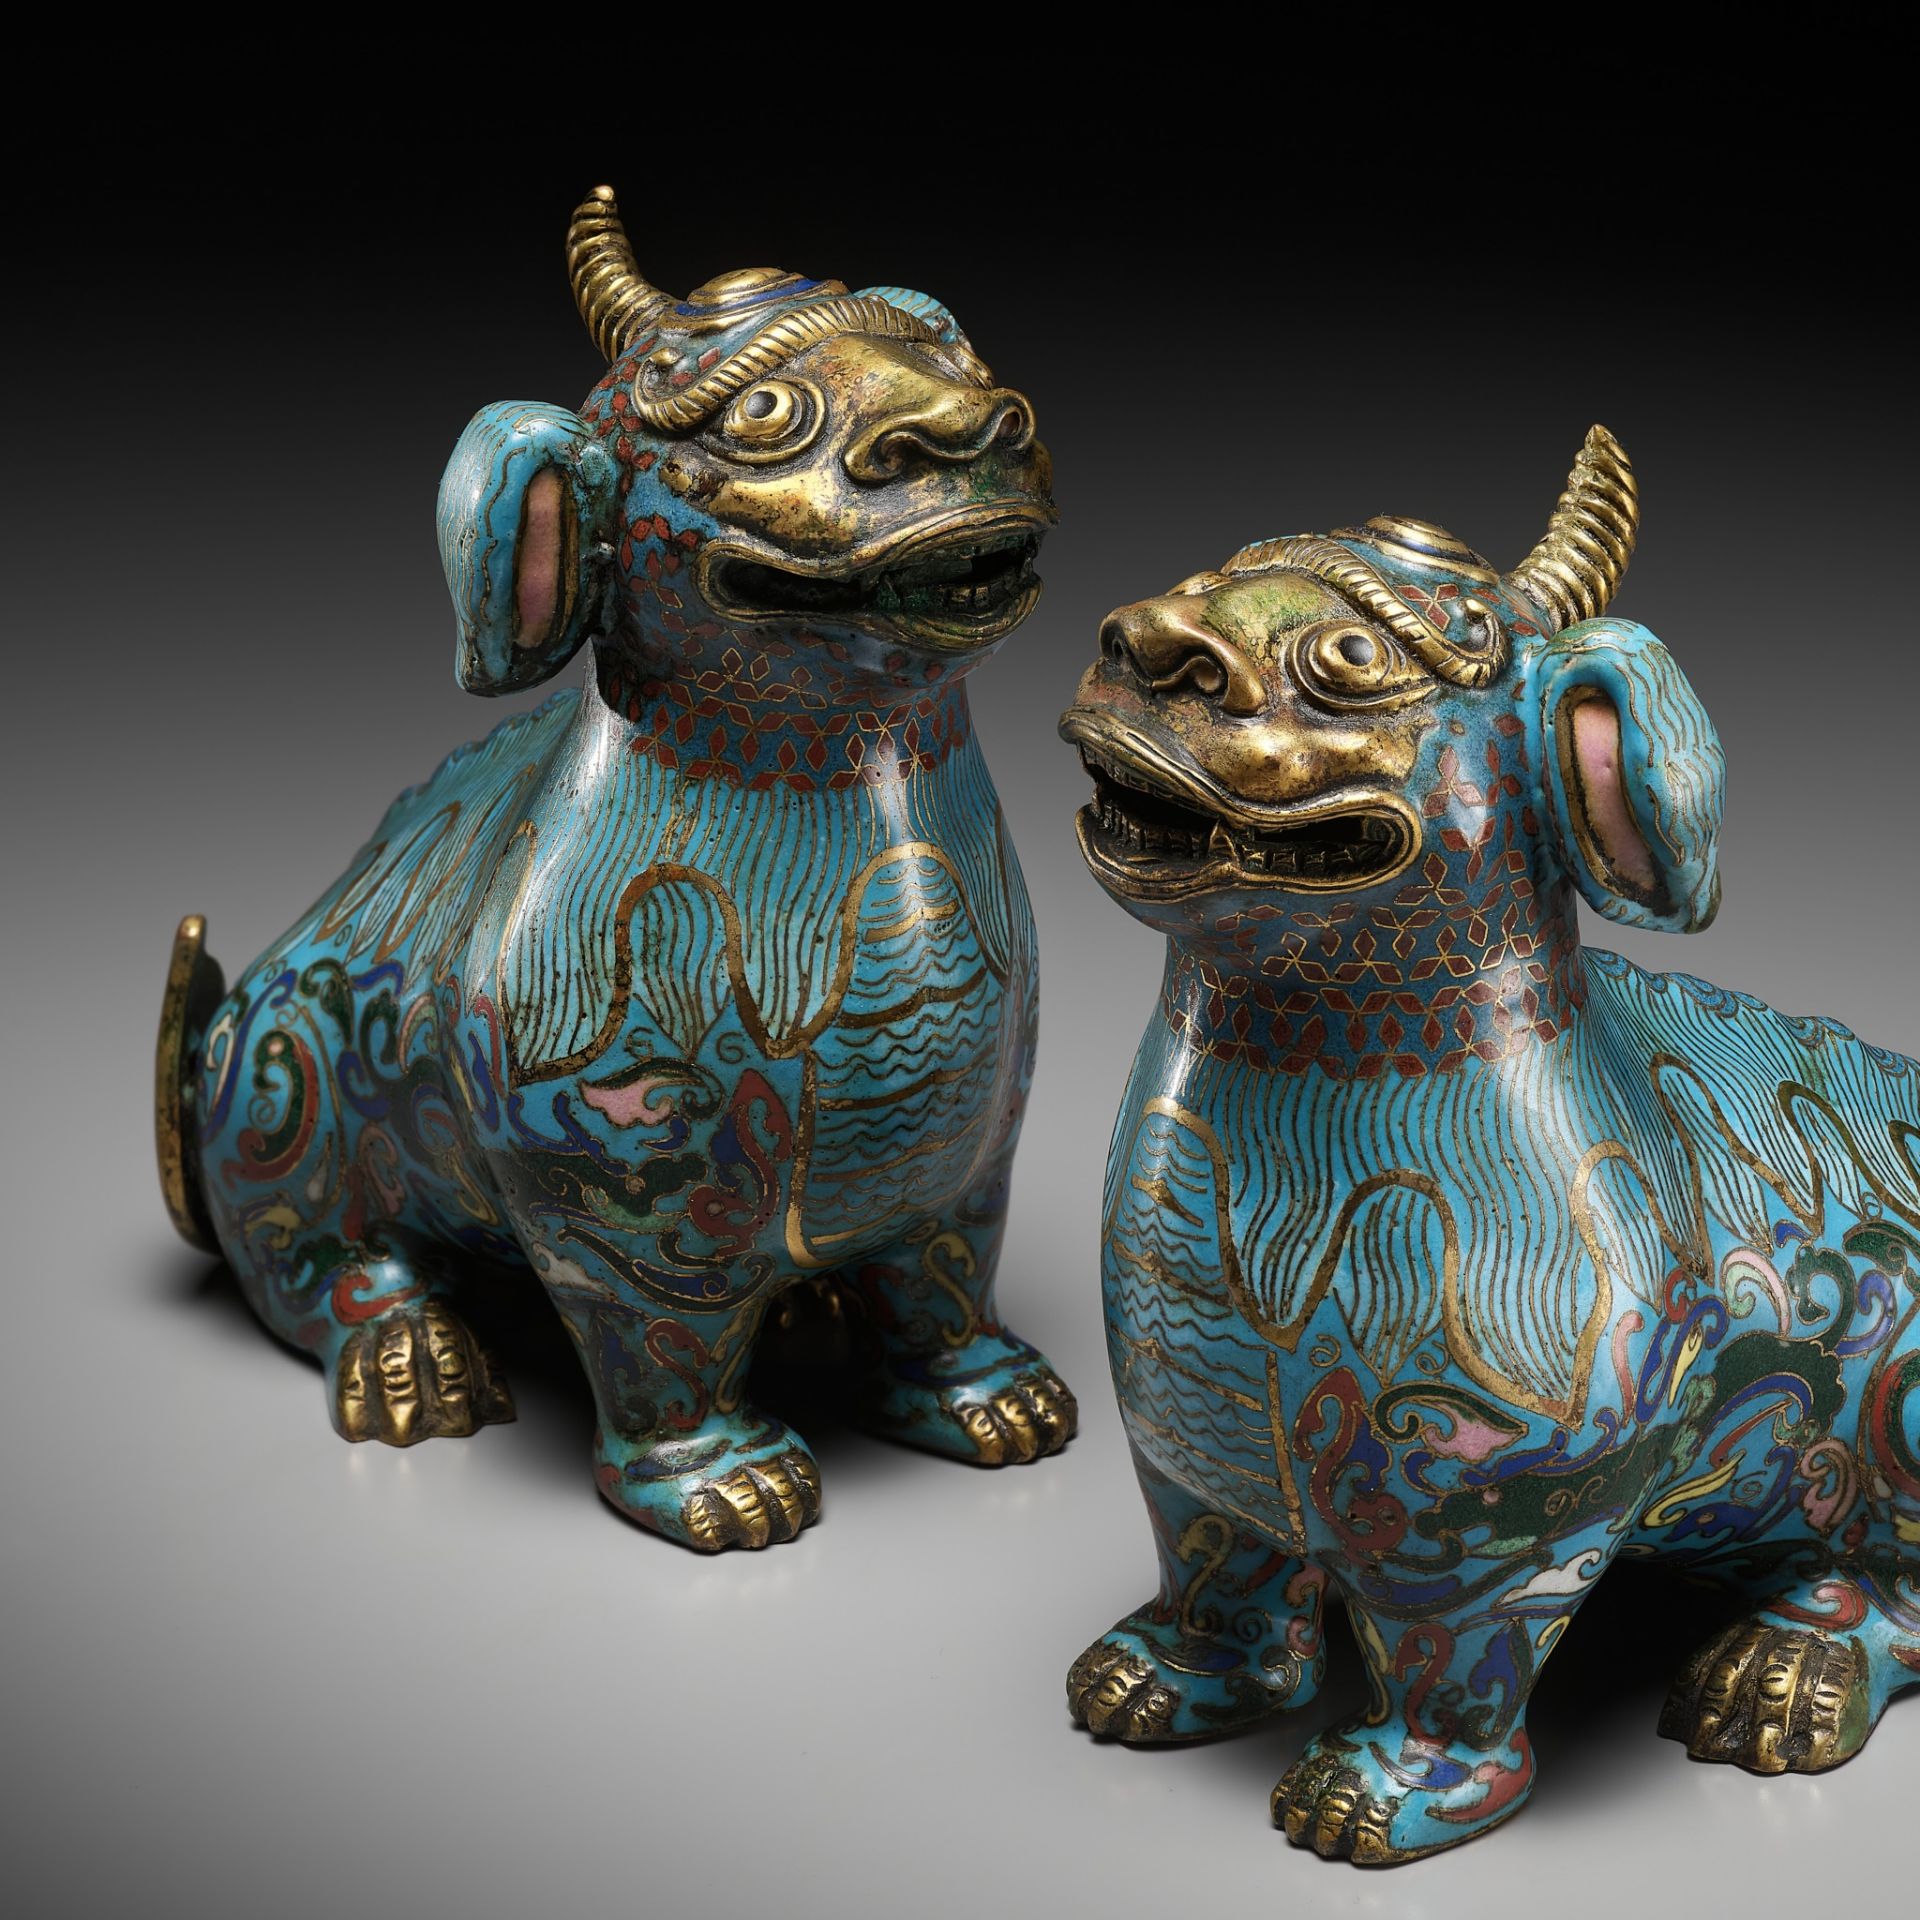 A PAIR OF GILT-BRONZE AND CLOISONNE ENAMEL LUDUAN, CHINA, 18TH - 19TH CENTURY